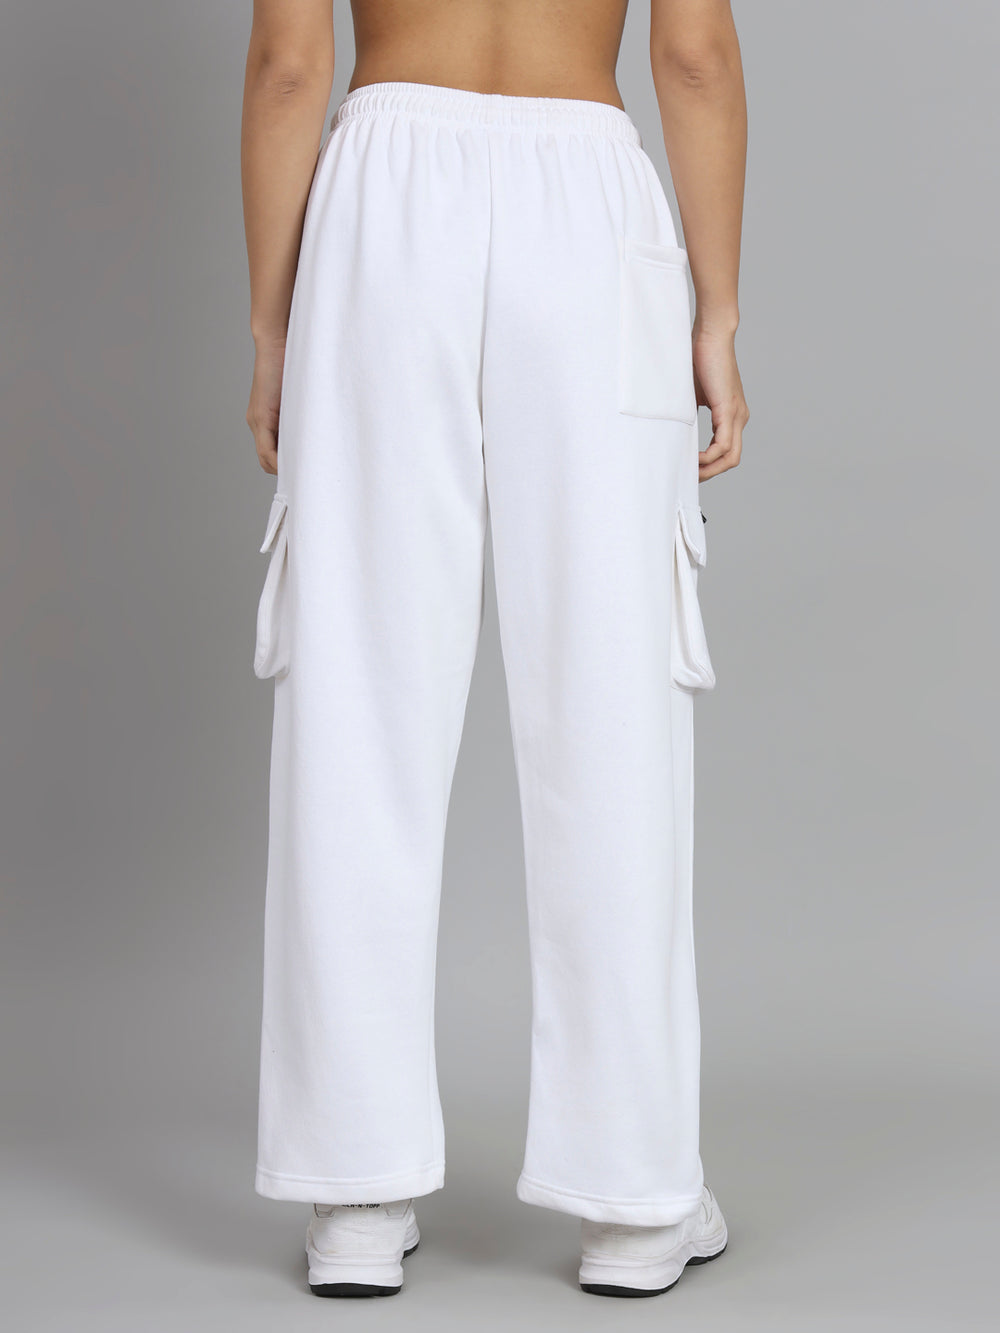 Griffel Women’s Basic Solid Oversized Fit 5 Pocket White Trackpant - griffel